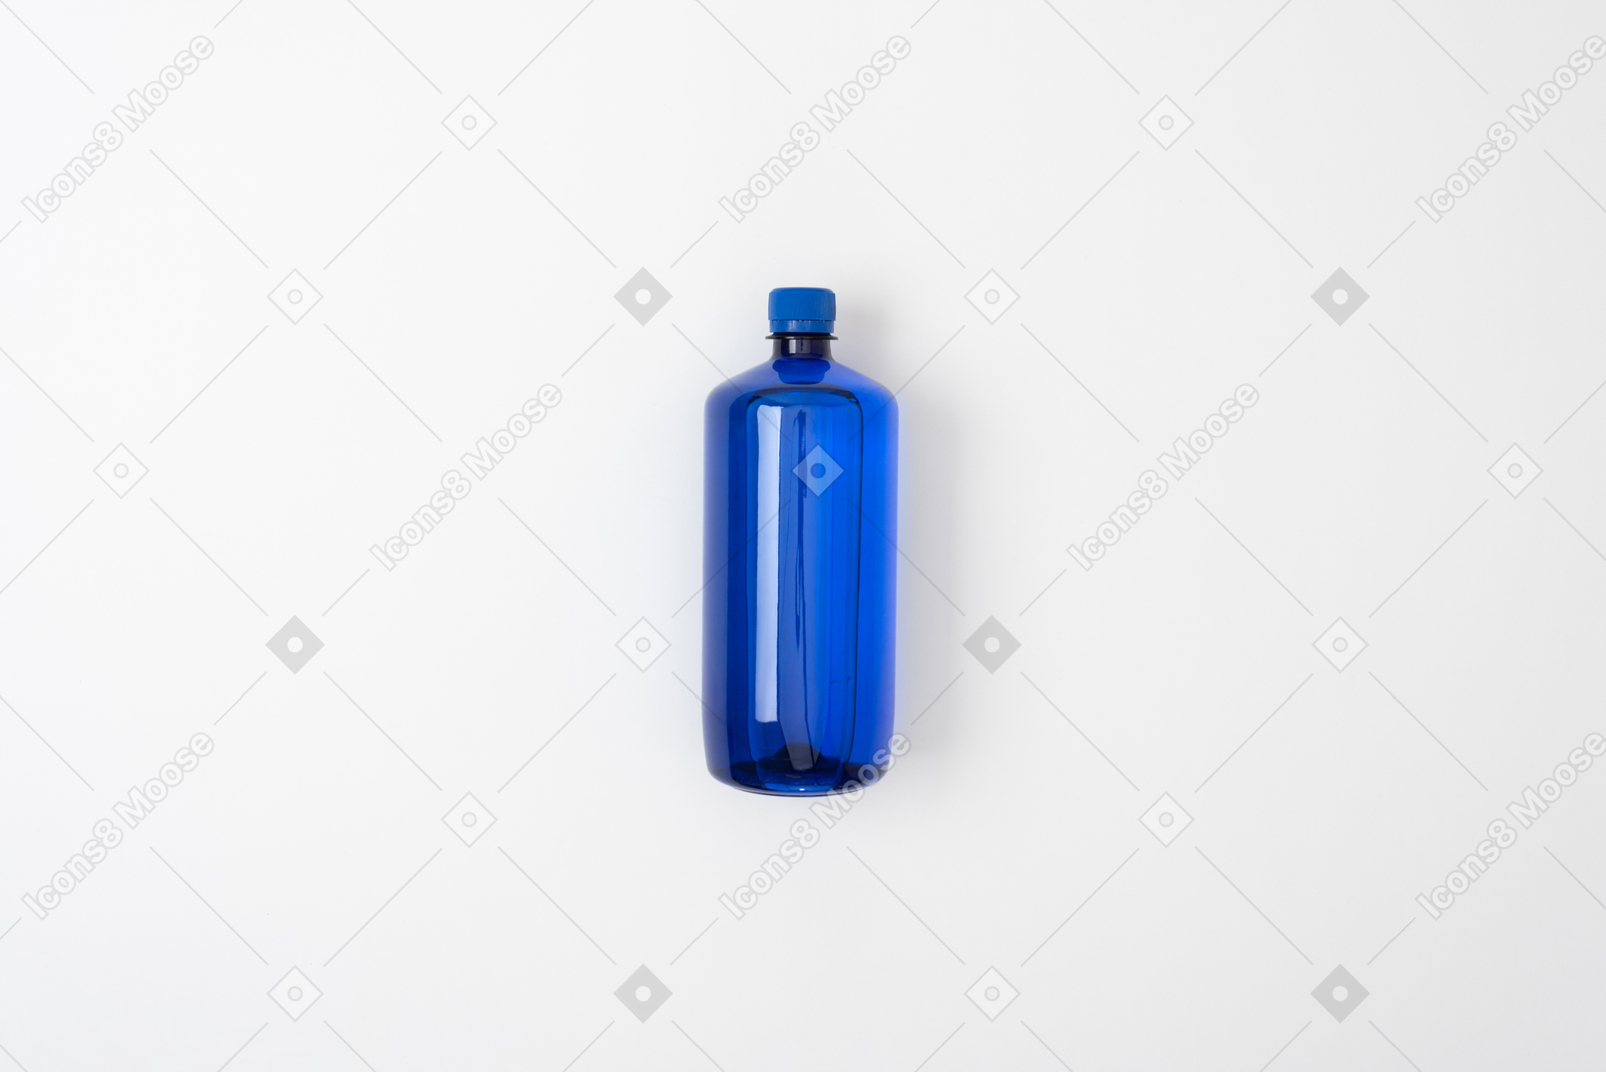 Apply your design ideas on a household bottle